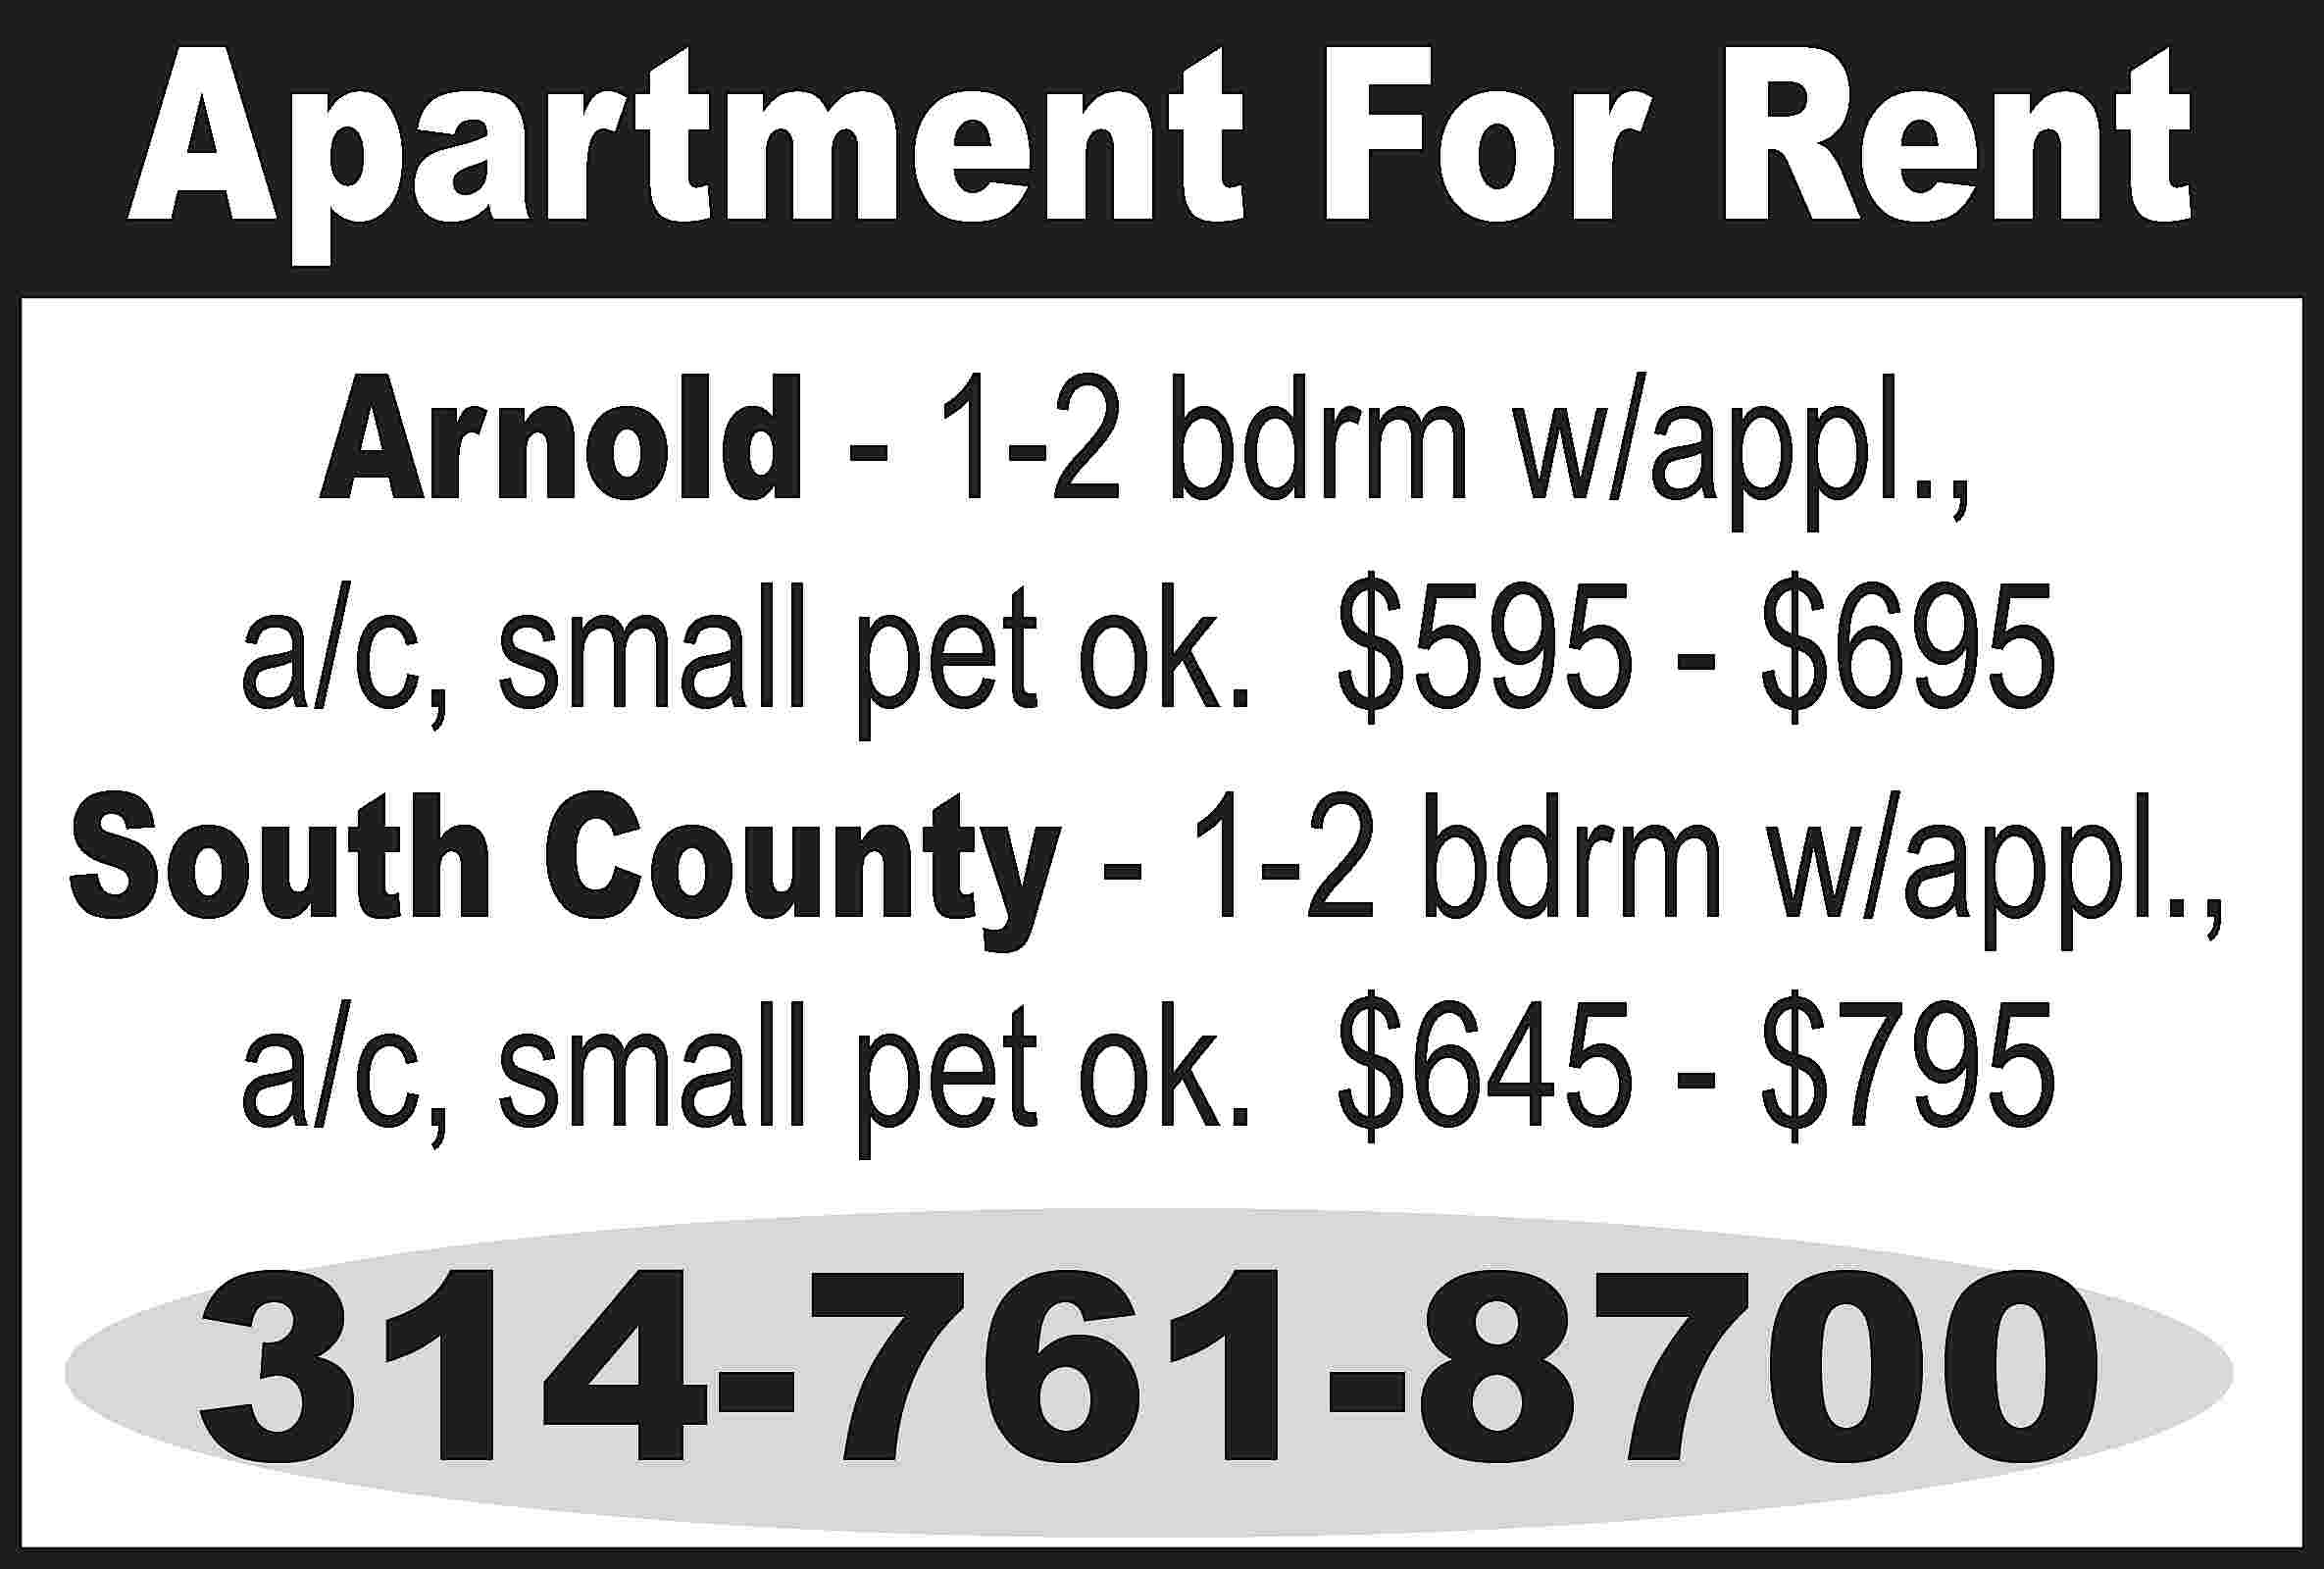 Apartment For Rent Arnold -  Apartment For Rent Arnold - 1-2 bdrm w/appl., a/c, small pet ok. $595 - $695 South County - 1-2 bdrm w/appl., a/c, small pet ok. $645 - $795 314-761-8700